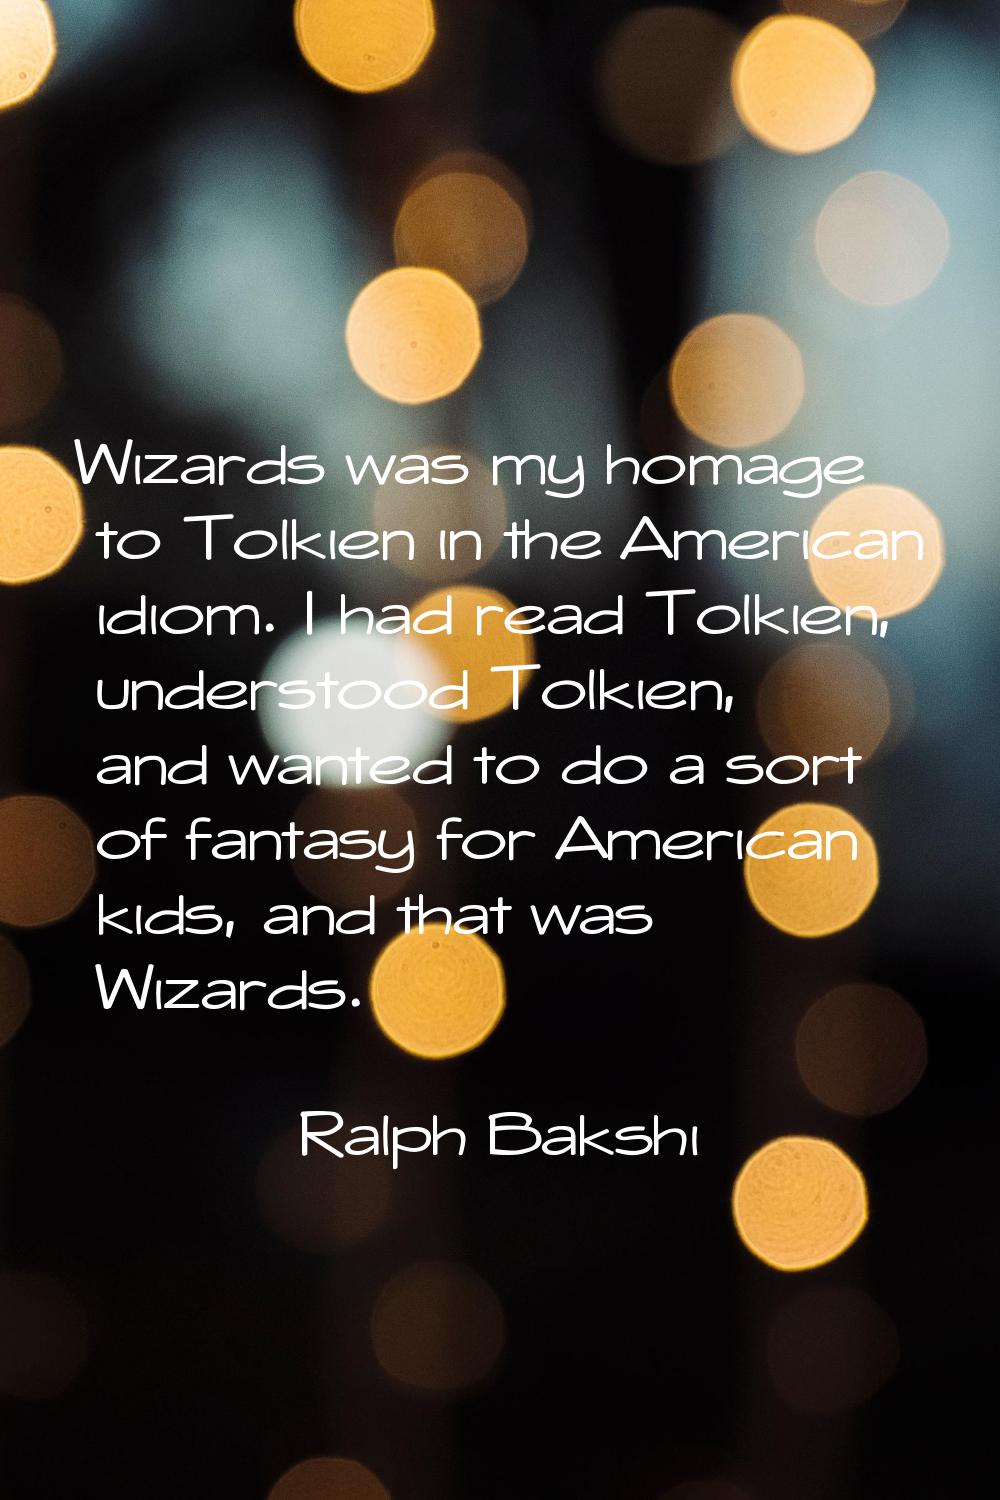 Wizards was my homage to Tolkien in the American idiom. I had read Tolkien, understood Tolkien, and